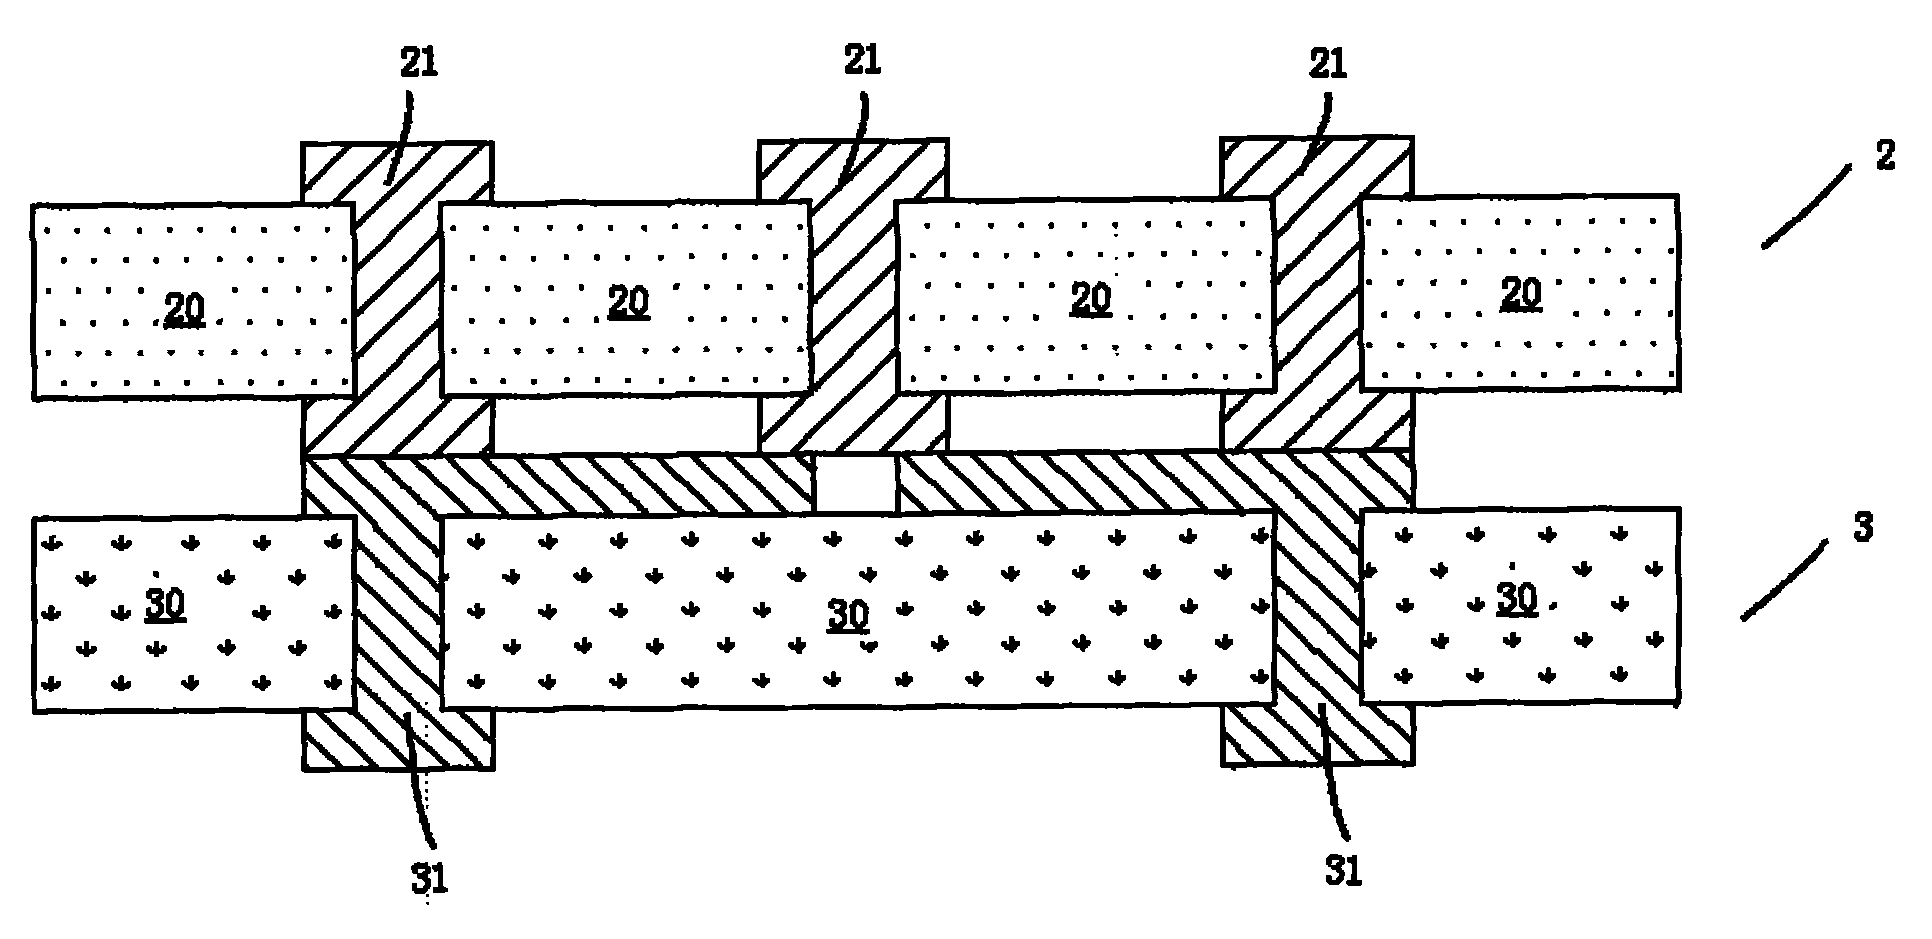 Silicon slice alignment method for silicon through hole interconnection